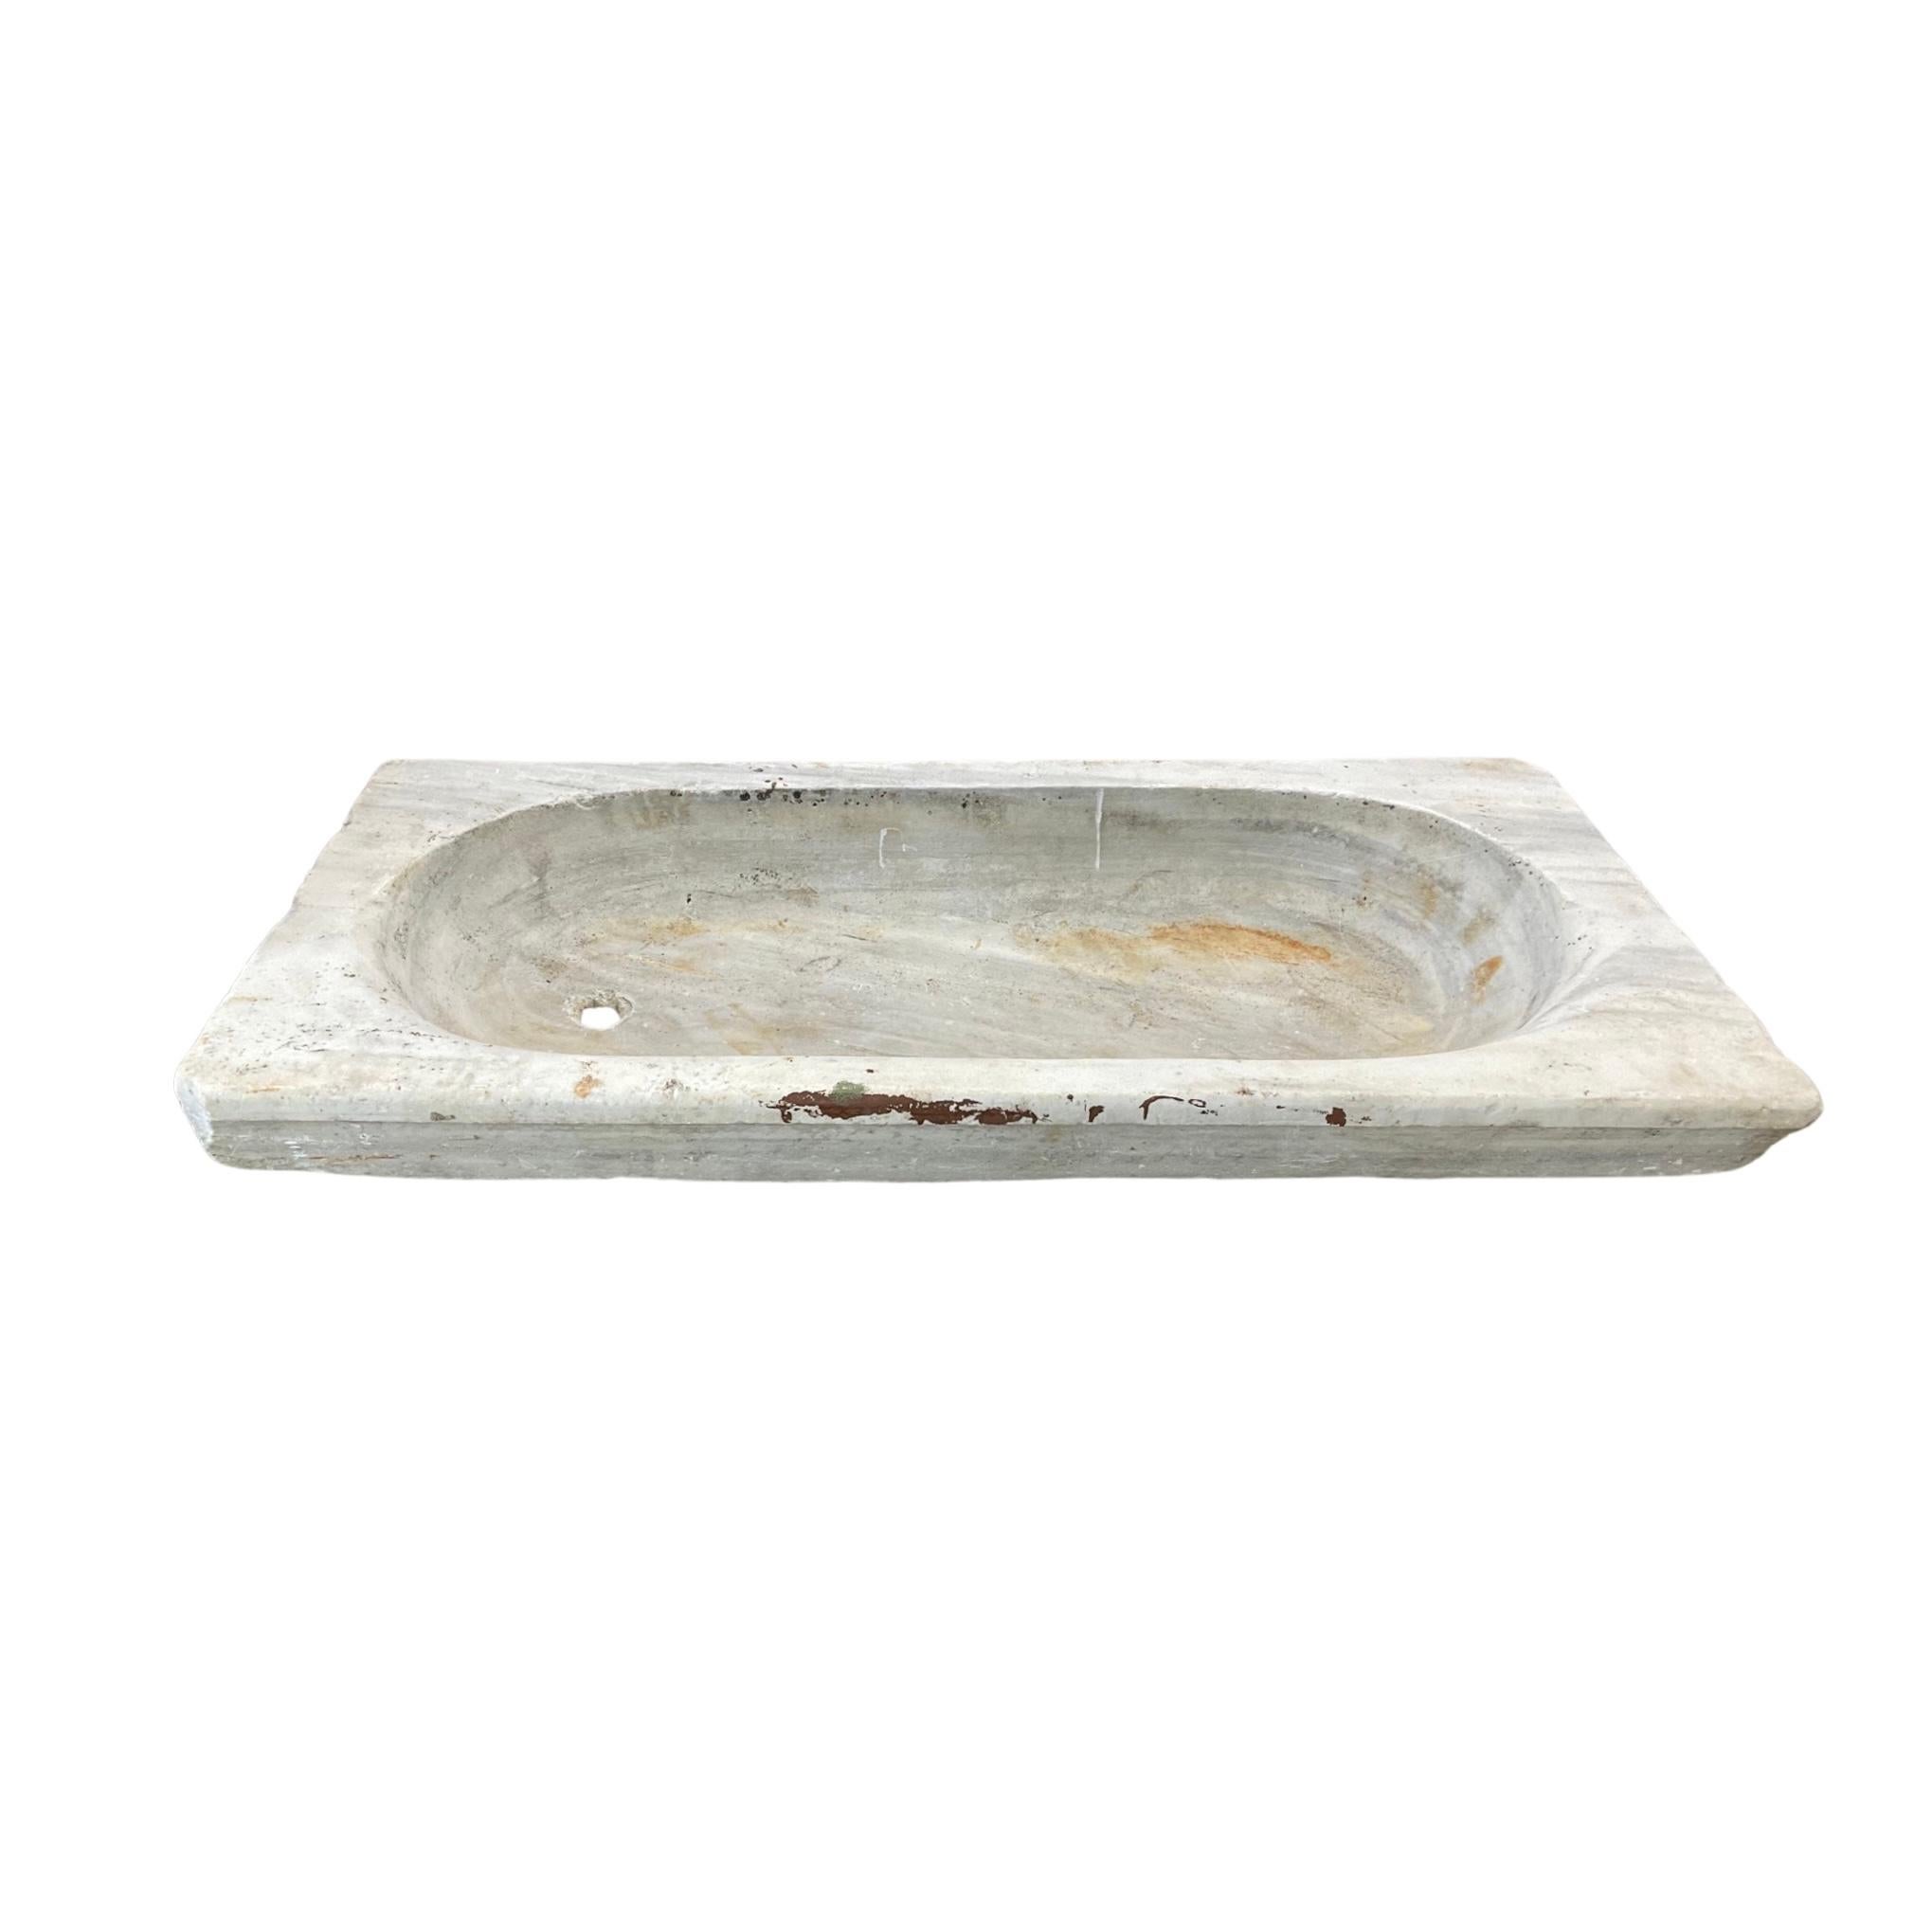 This large classic French White Carrara Marble Sink is finely crafted using luxurious 18th-century marble. Its spacious design and pre-drilled hole allow for easy and efficient drainage. Compliment your space with a cool and pure white look.